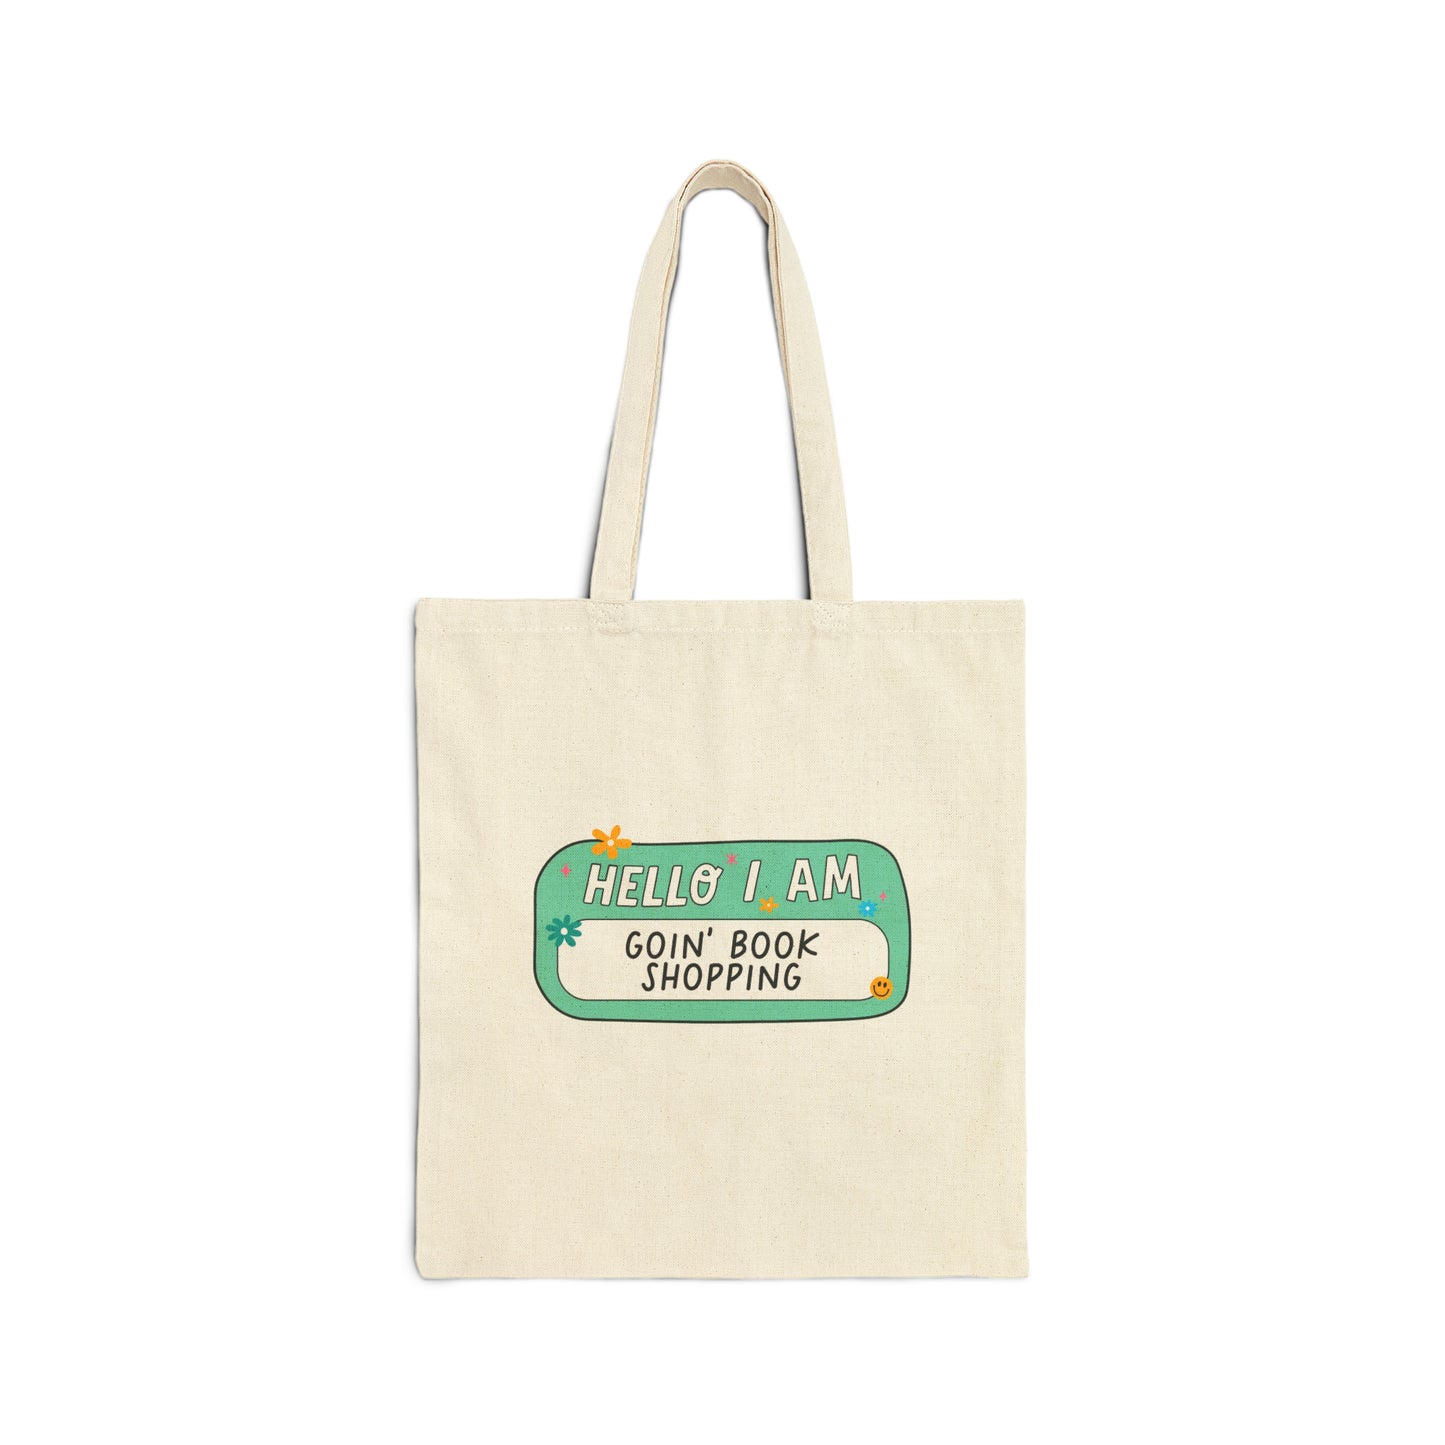 Going Book Shopping Tote Bag